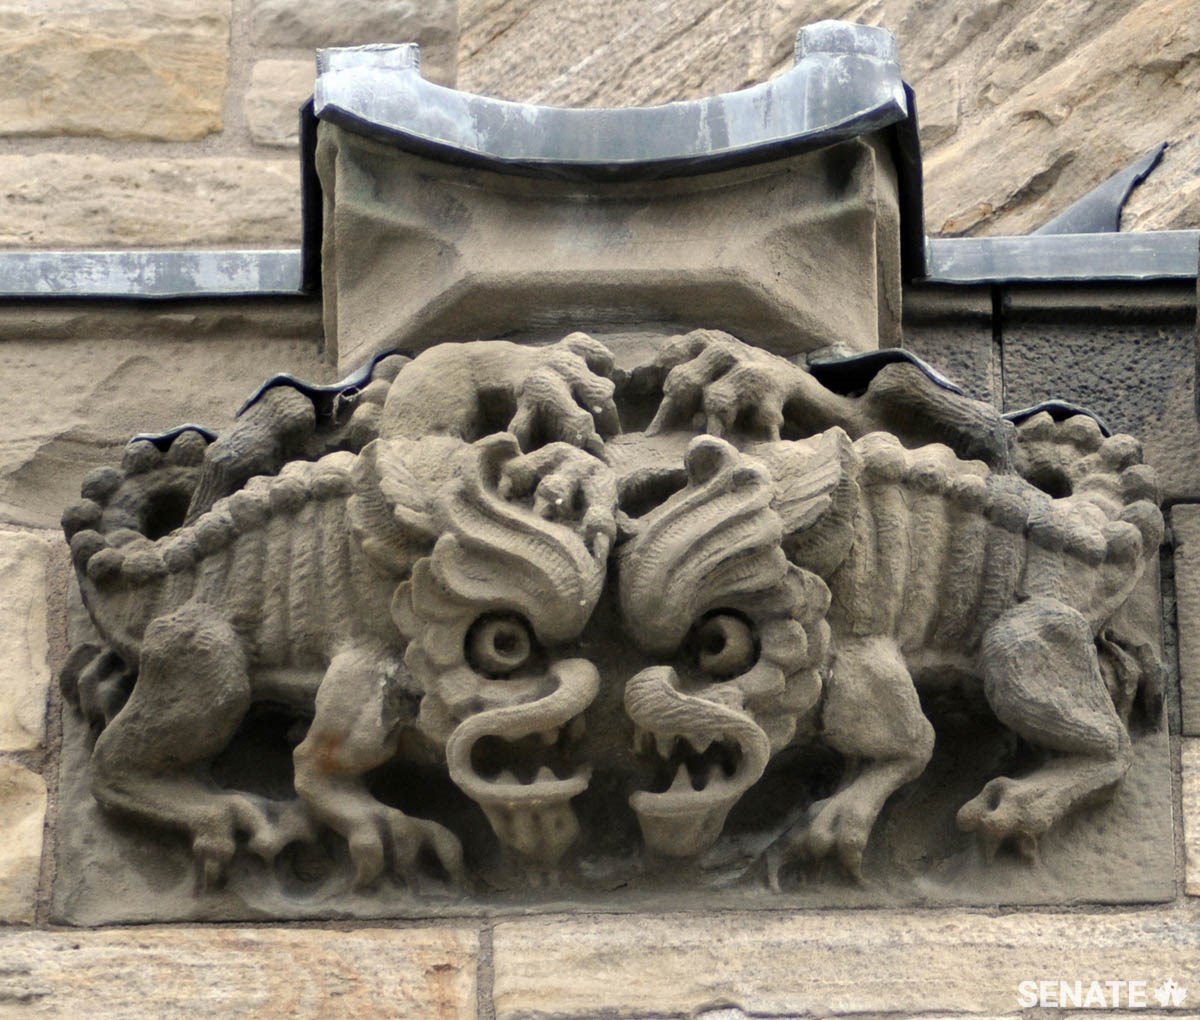 Head-butting dragons adorn the exterior of Centre Block.